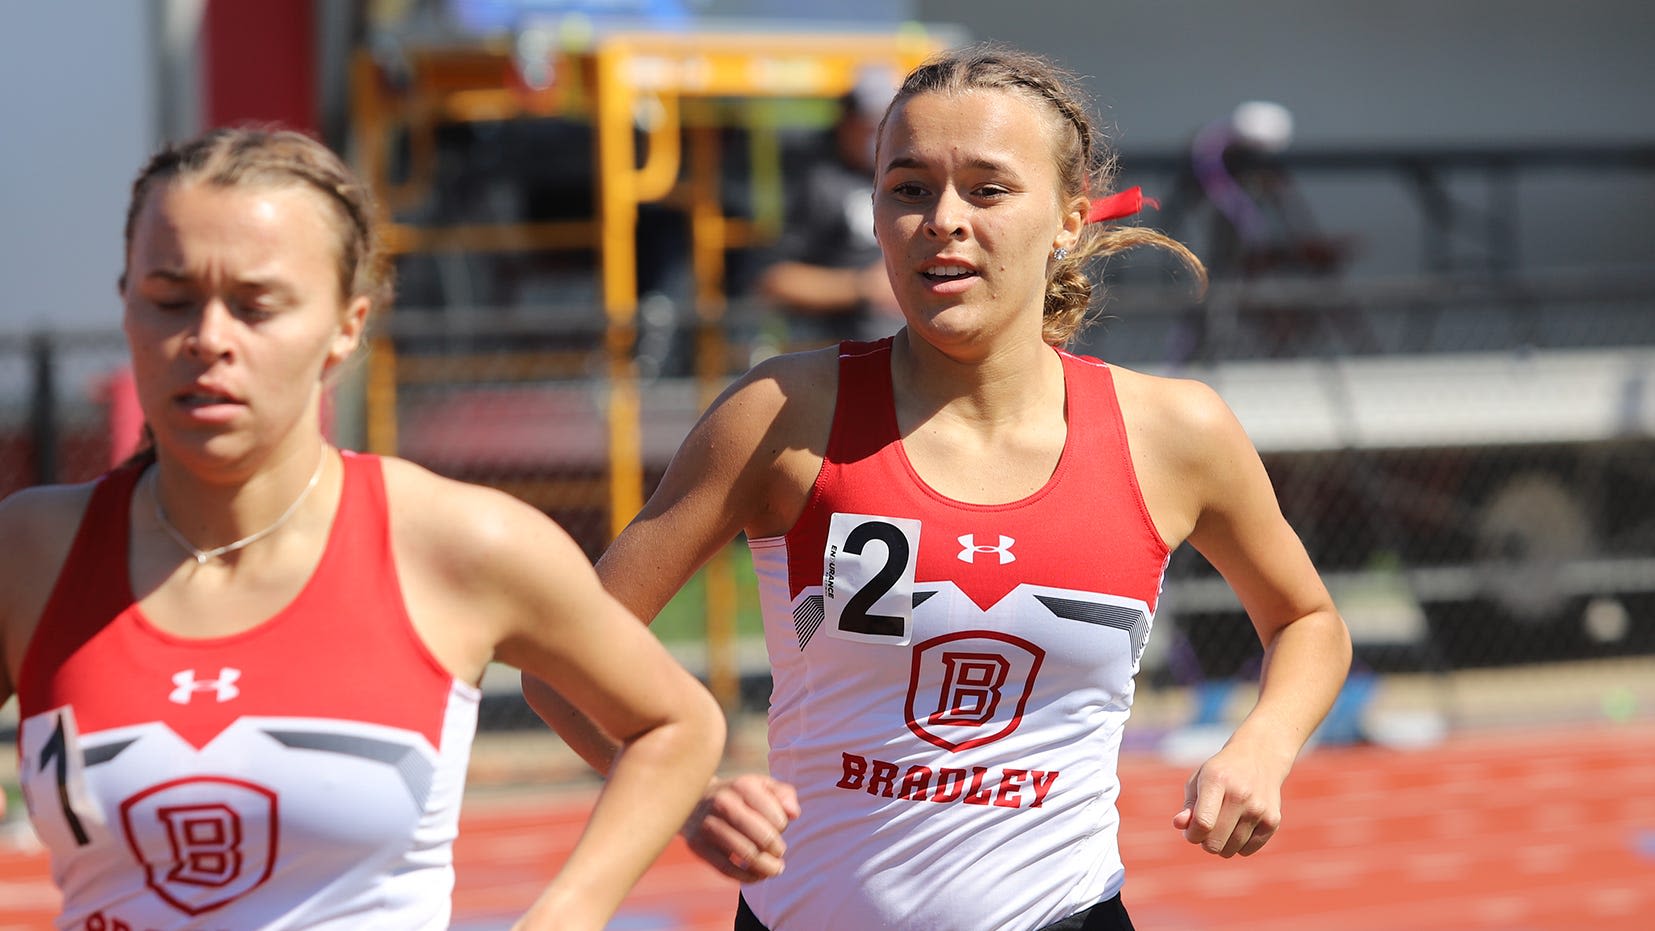 3 Bradley runners compete this weekend at the NCAA track and field regionals